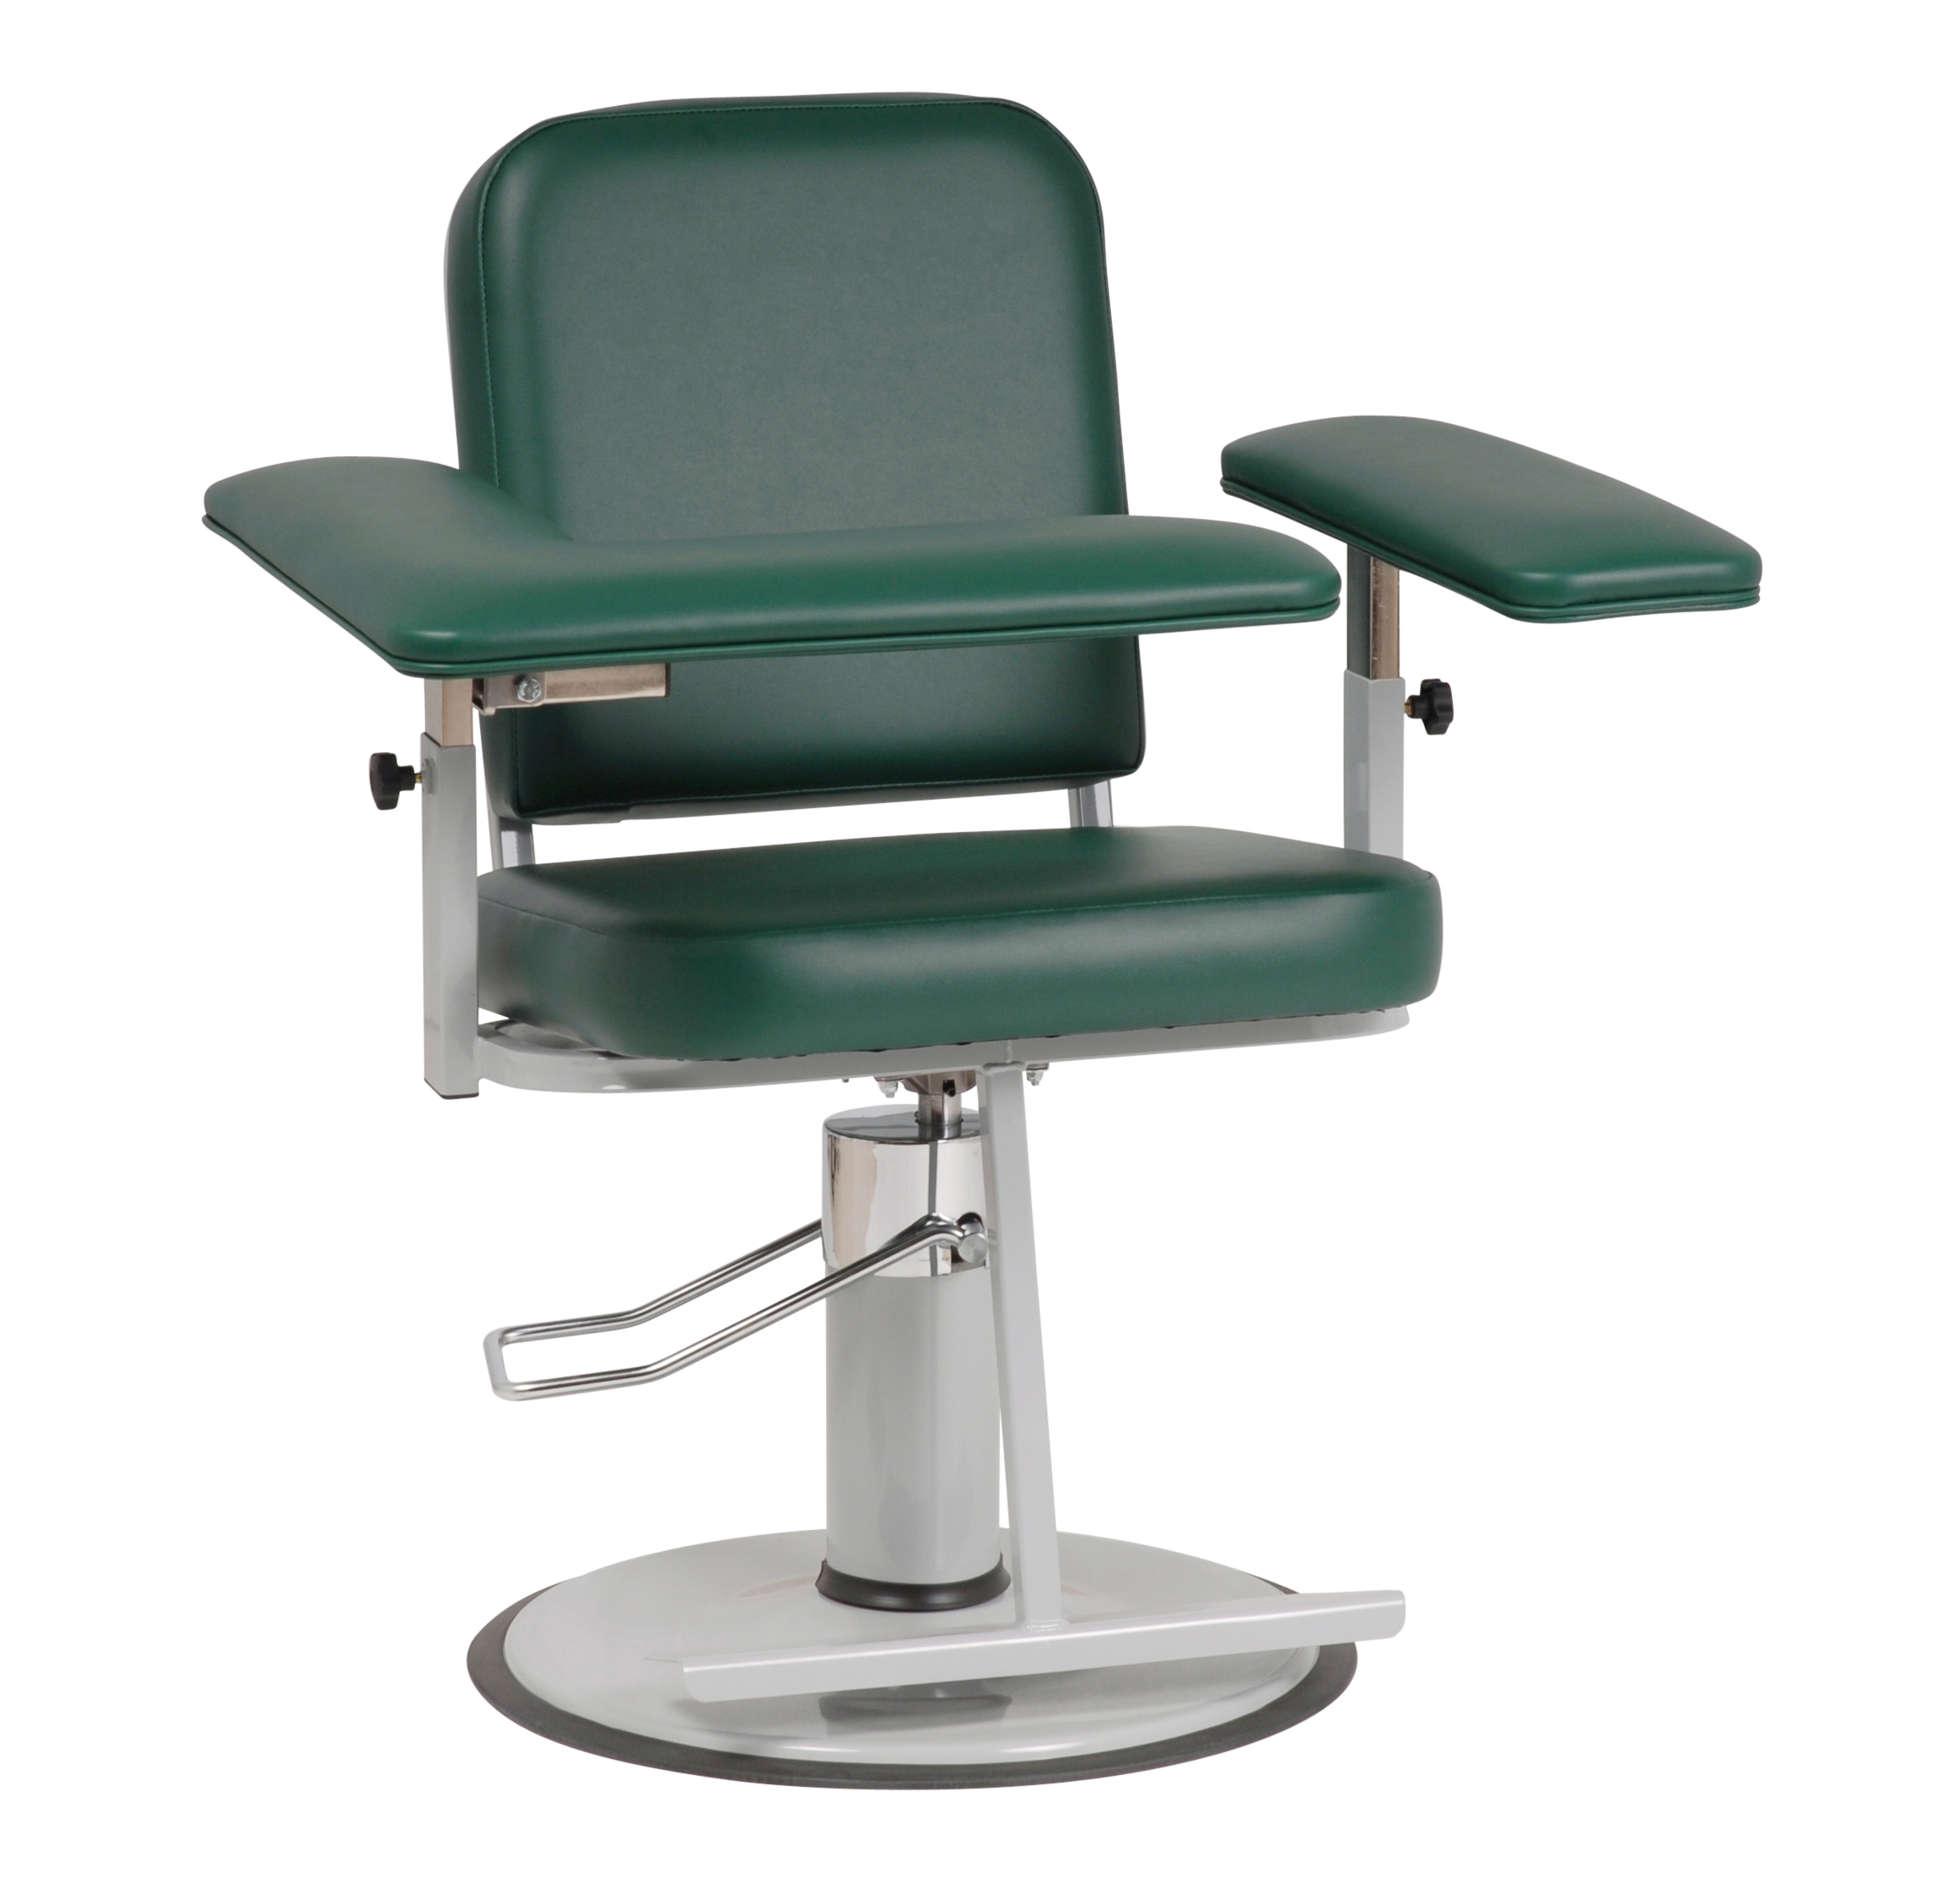 Adjustable Height Blood Draw Chairs